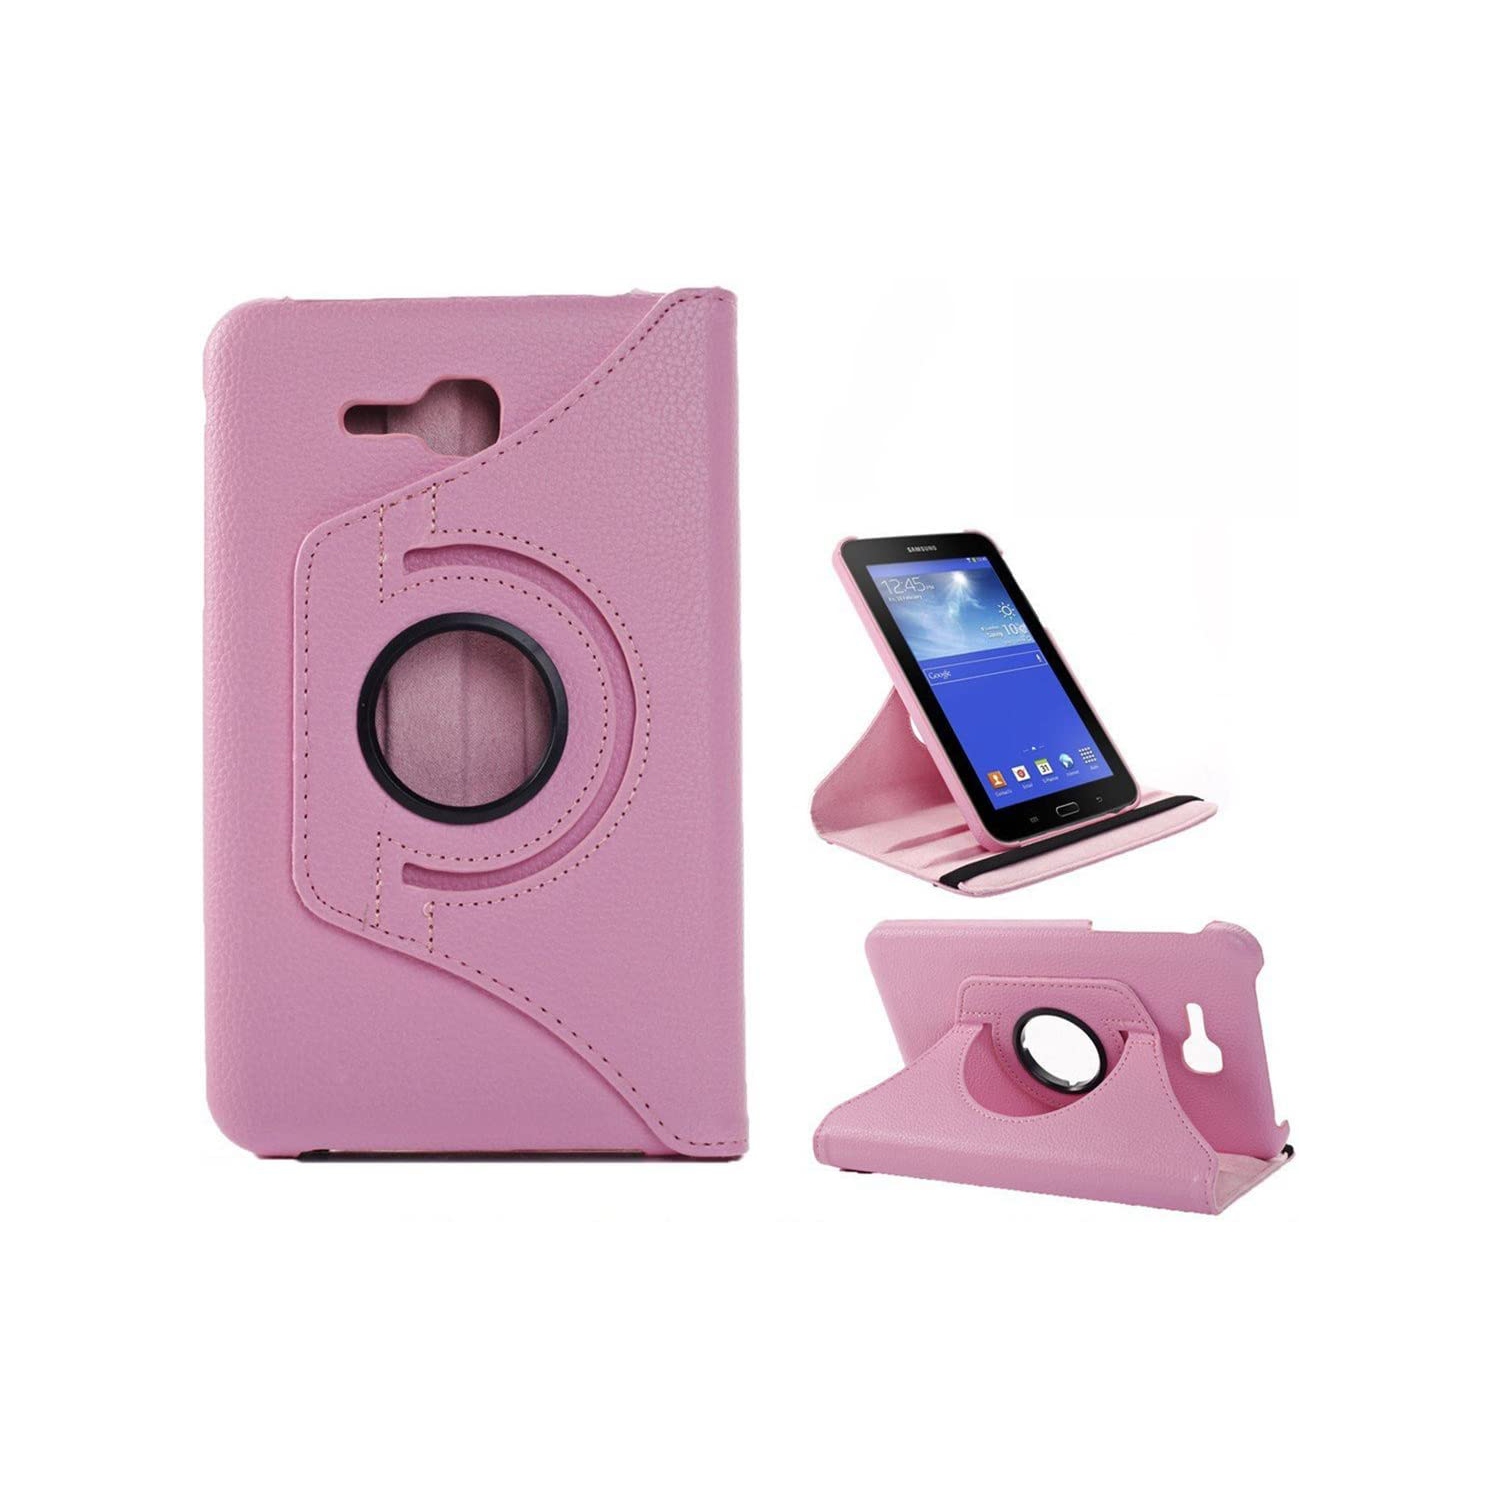 【CSmart】 360 Rotating Leather Tablet Case Smart Stand Cover for Samsung Tab E Lite 7.0" T110 T113 T115, Light Pink